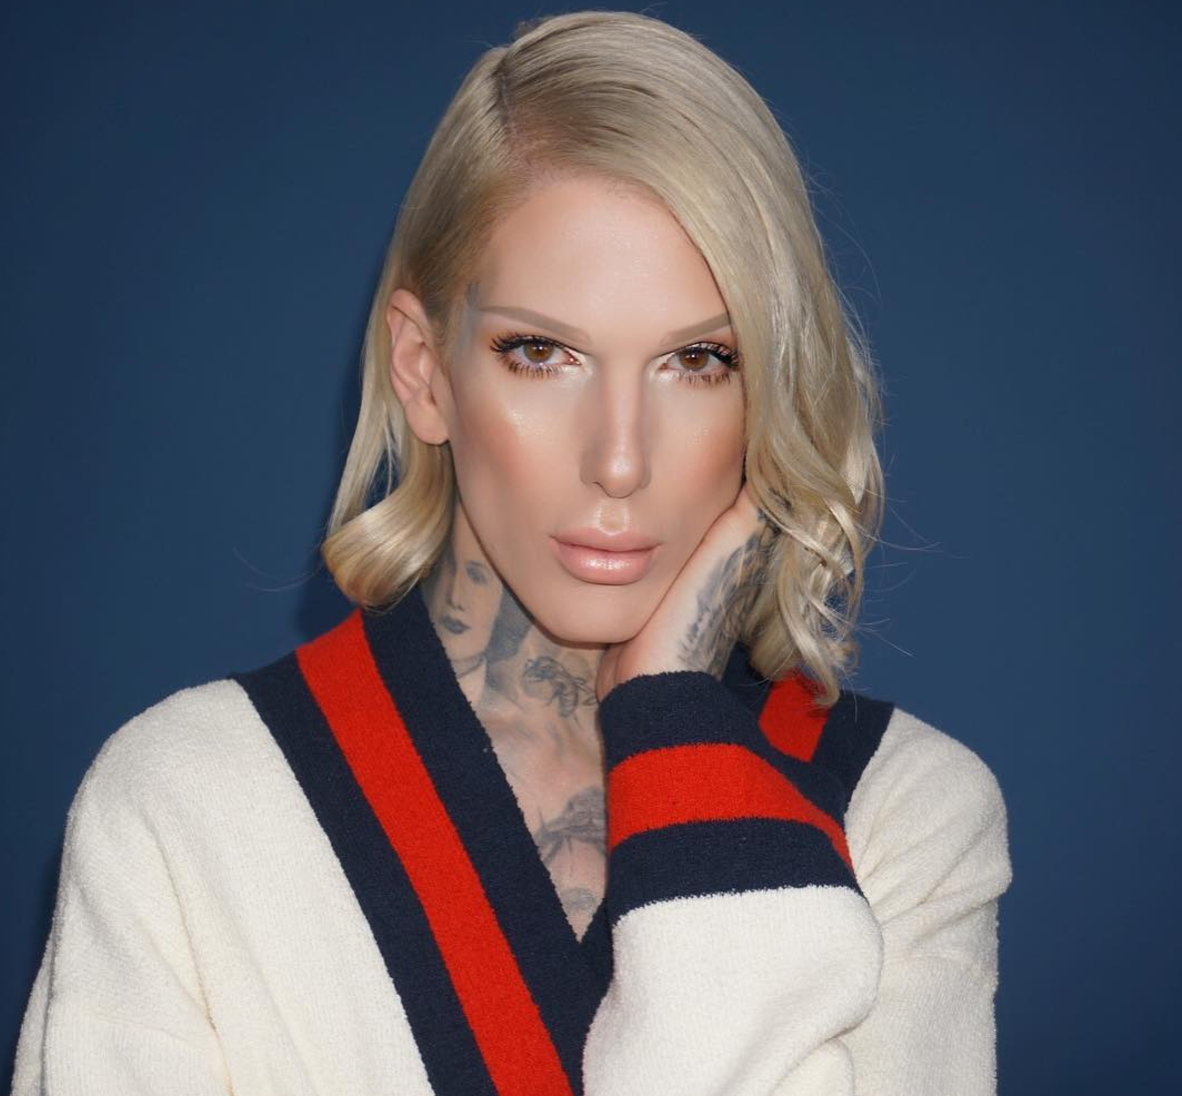 Jeffree Star Apologizes For Past Racist Remarks